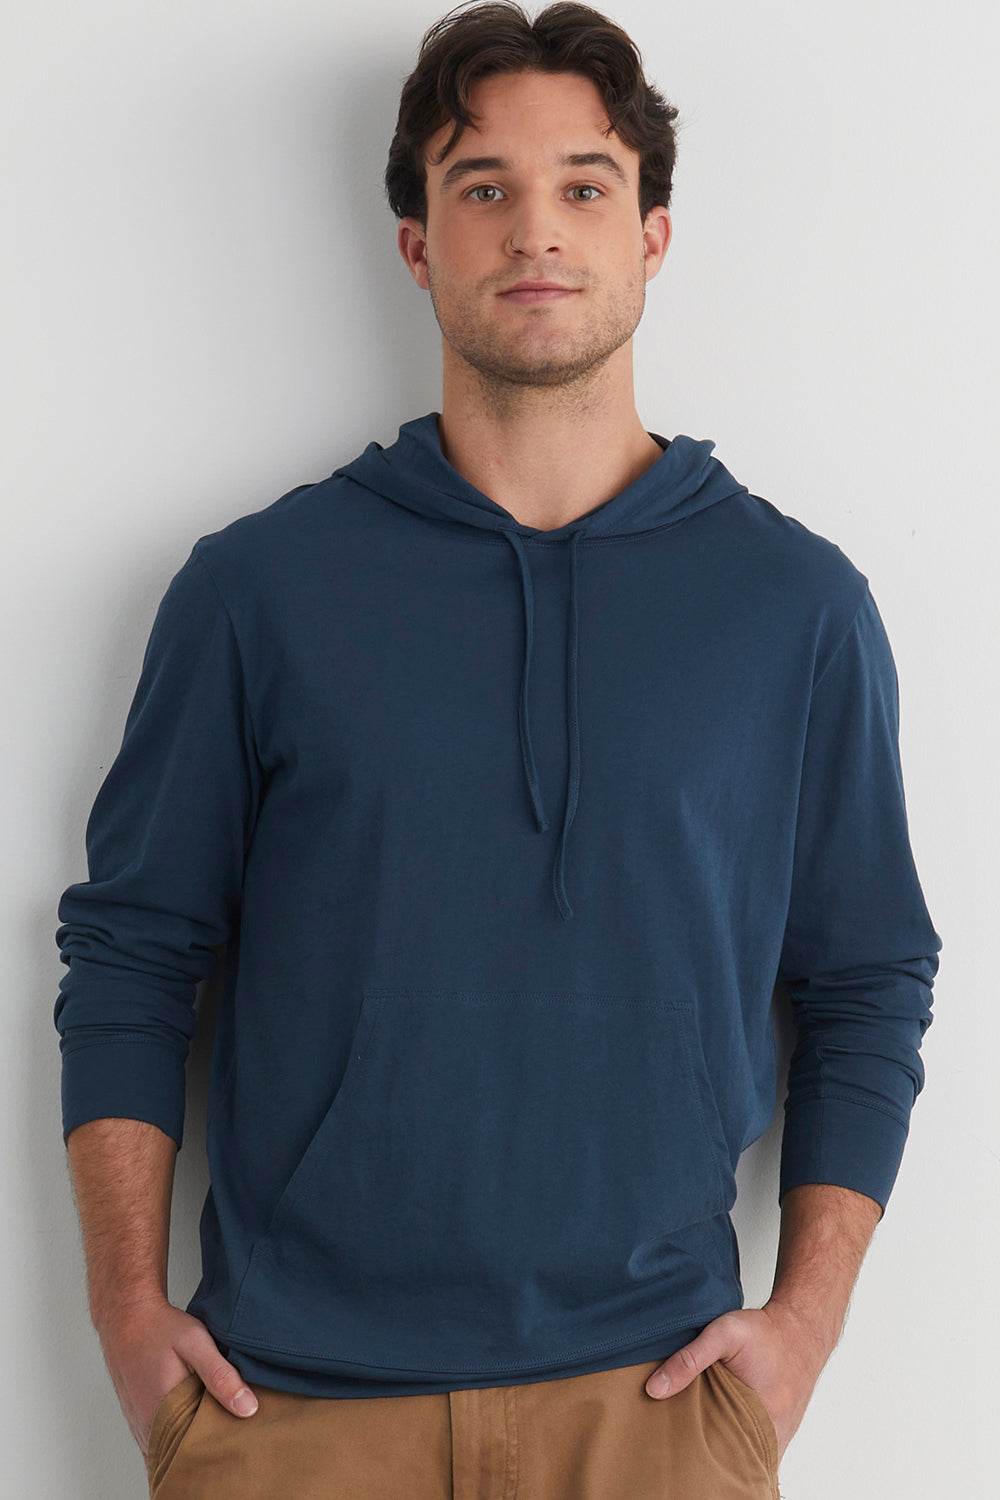 Soft & Warm 100% Ring Spun Super Combed Cotton Pullover Hoodie - Premium  300 GSM in Plain Hoodies